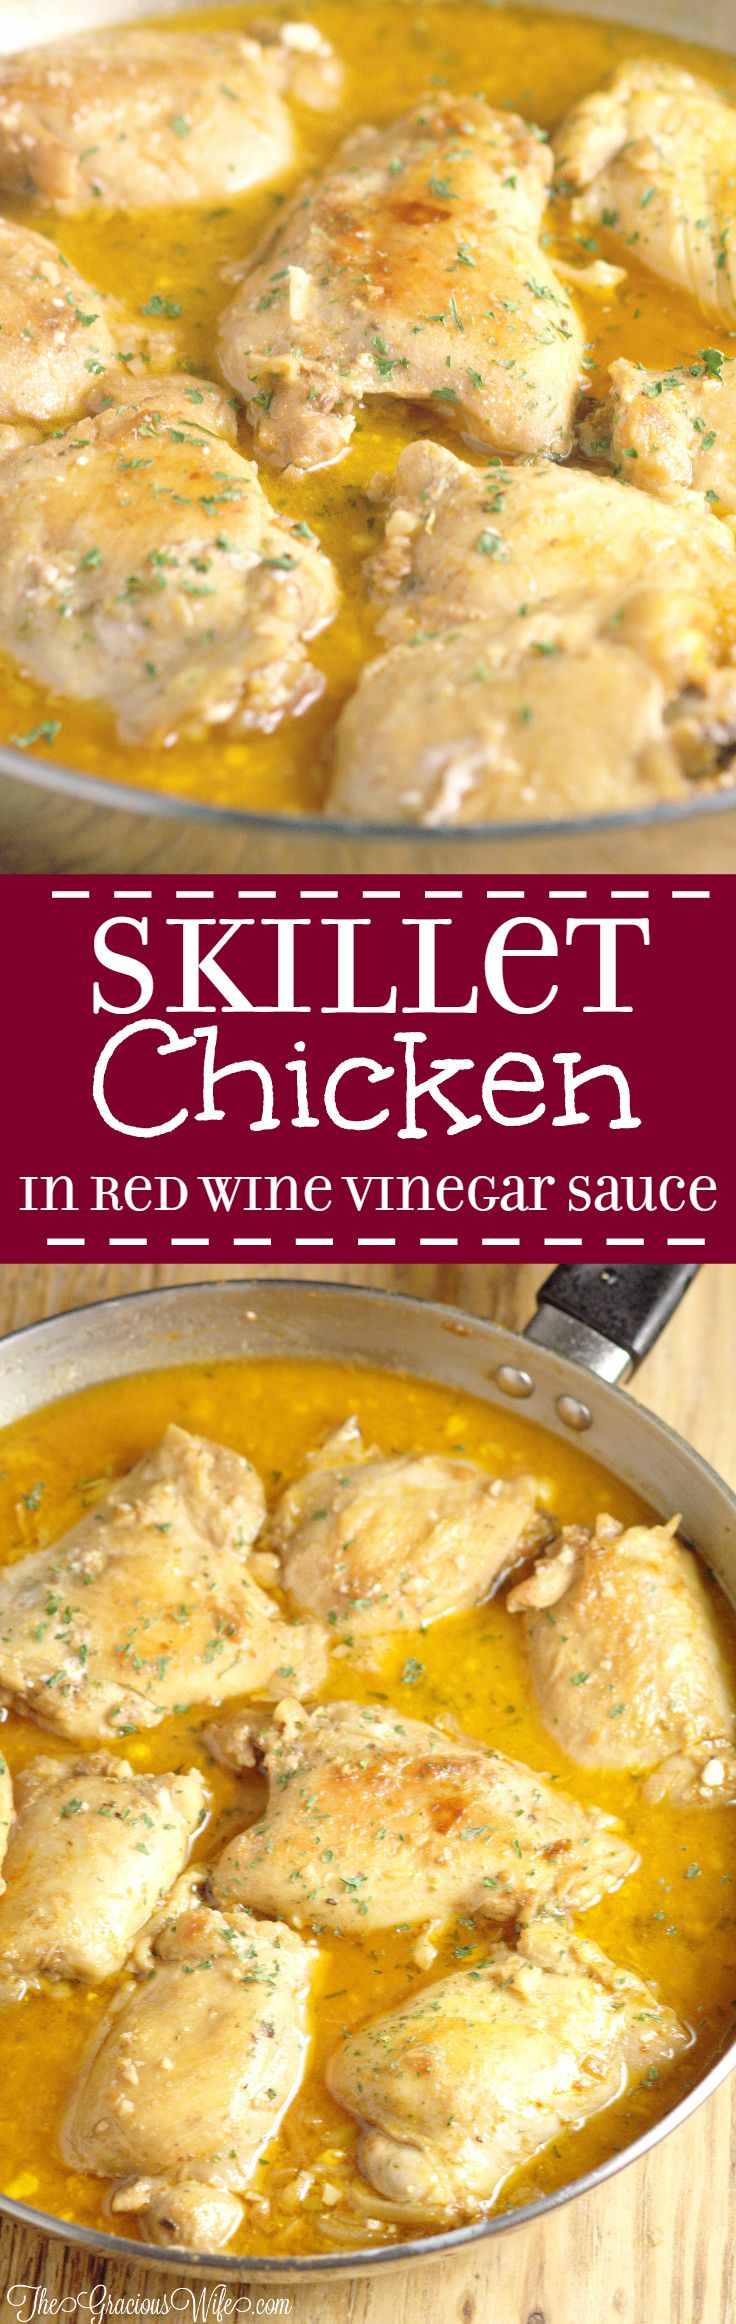 Skillet Chicken Thighs with Shallots in Red Wine Vinegar Sauce is a quick and easy dinner recipe idea that can be made in one pan in 30 minutes but is delicious and elegant enough for company and entertaining. I love the creamy sauce!